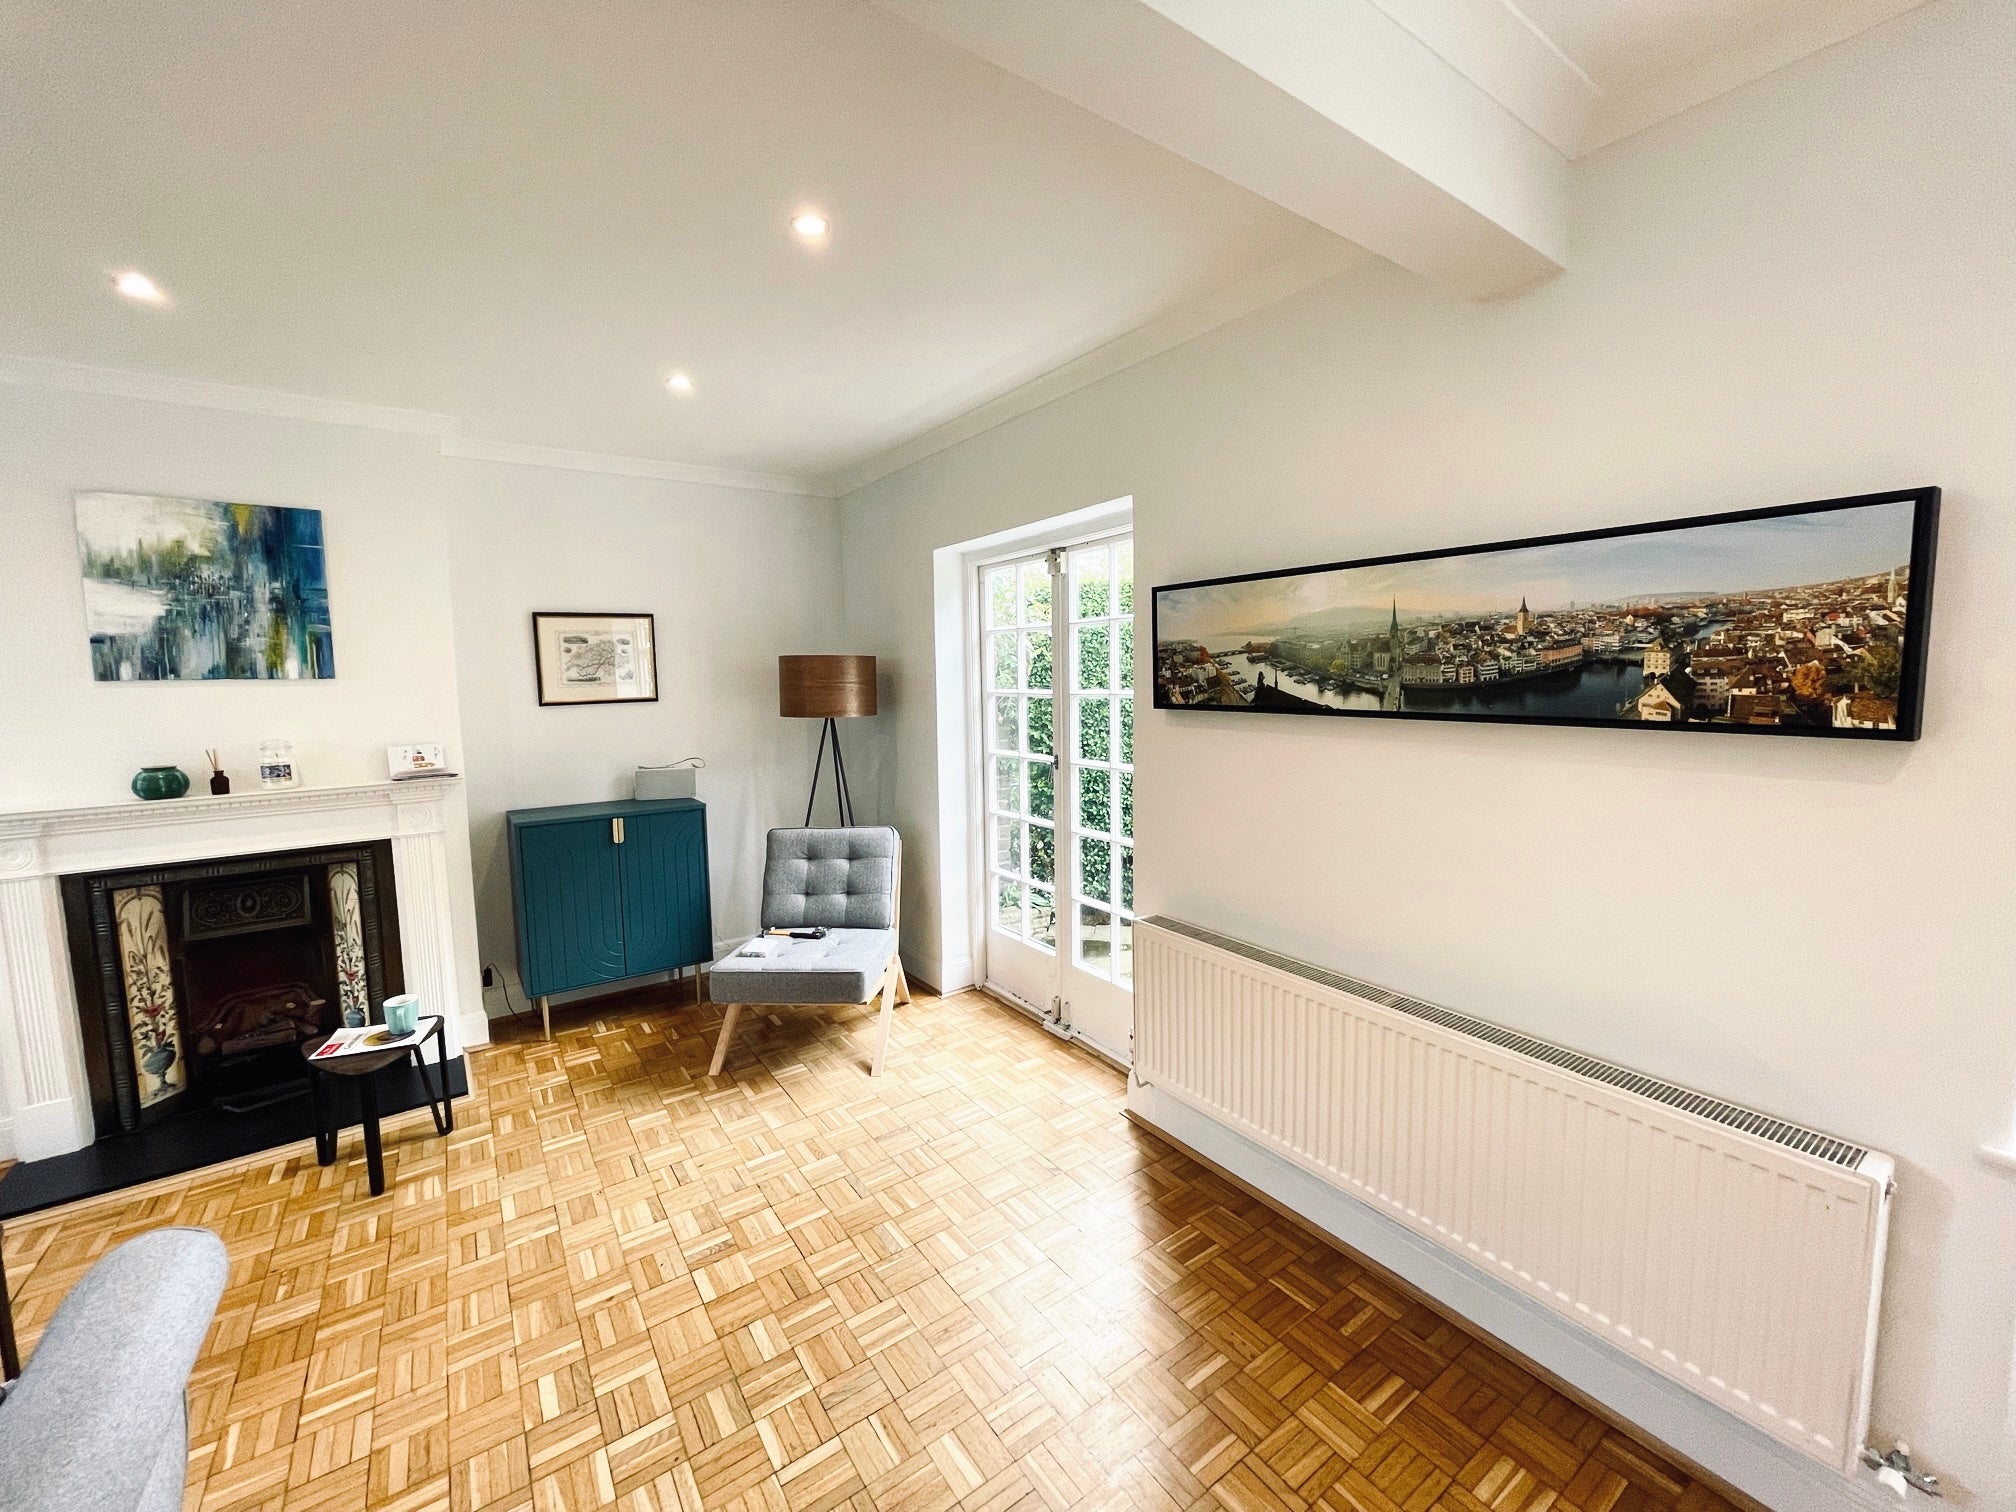 Ultra panoramic in living room